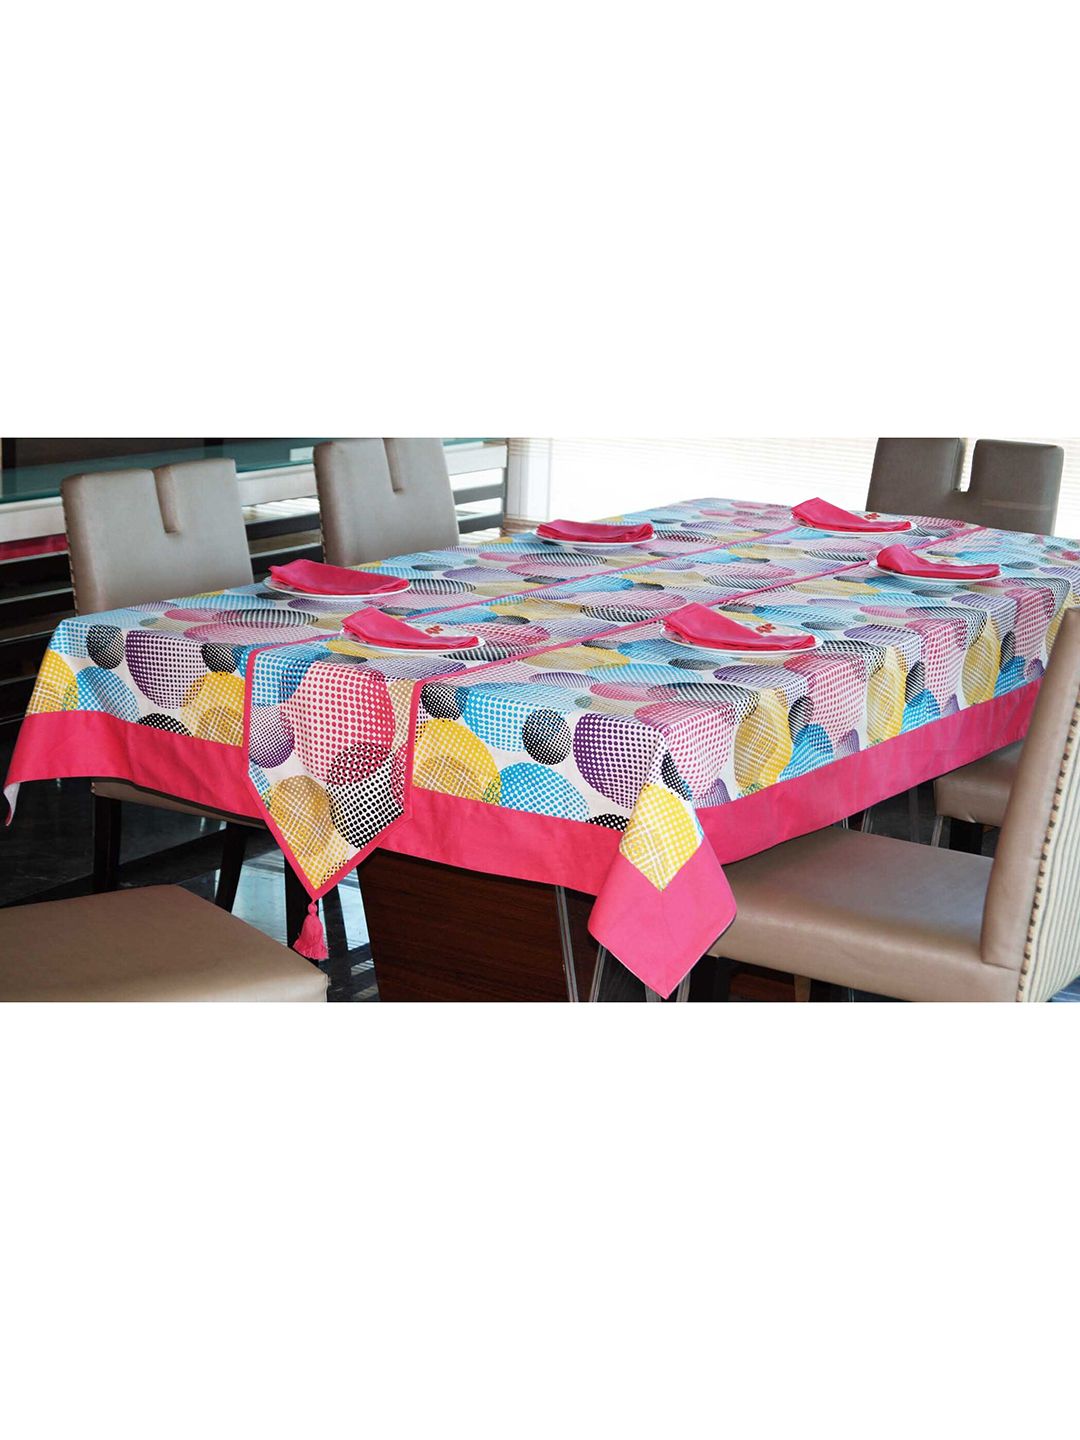 Lushomes Pink & Blue Abstract Printed 6 Seater Cotton Table Linen Set Price in India